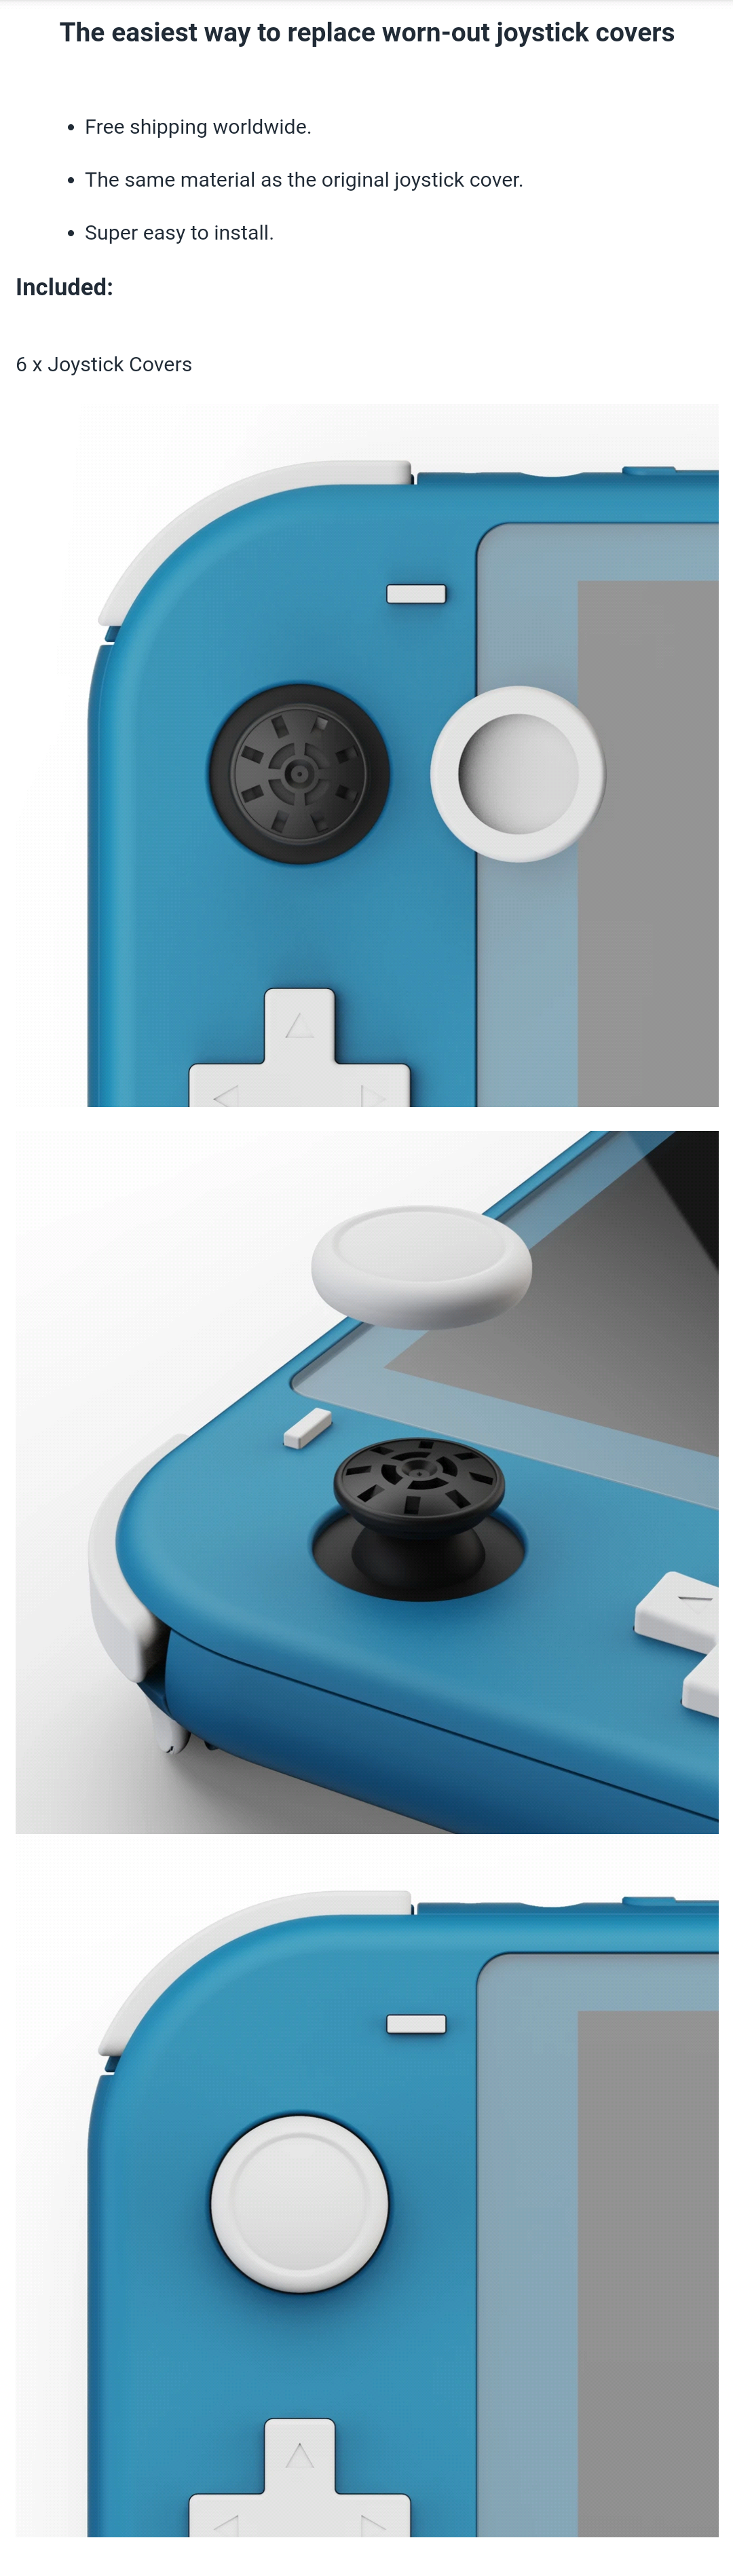 nintendo switch joystick cover replacement